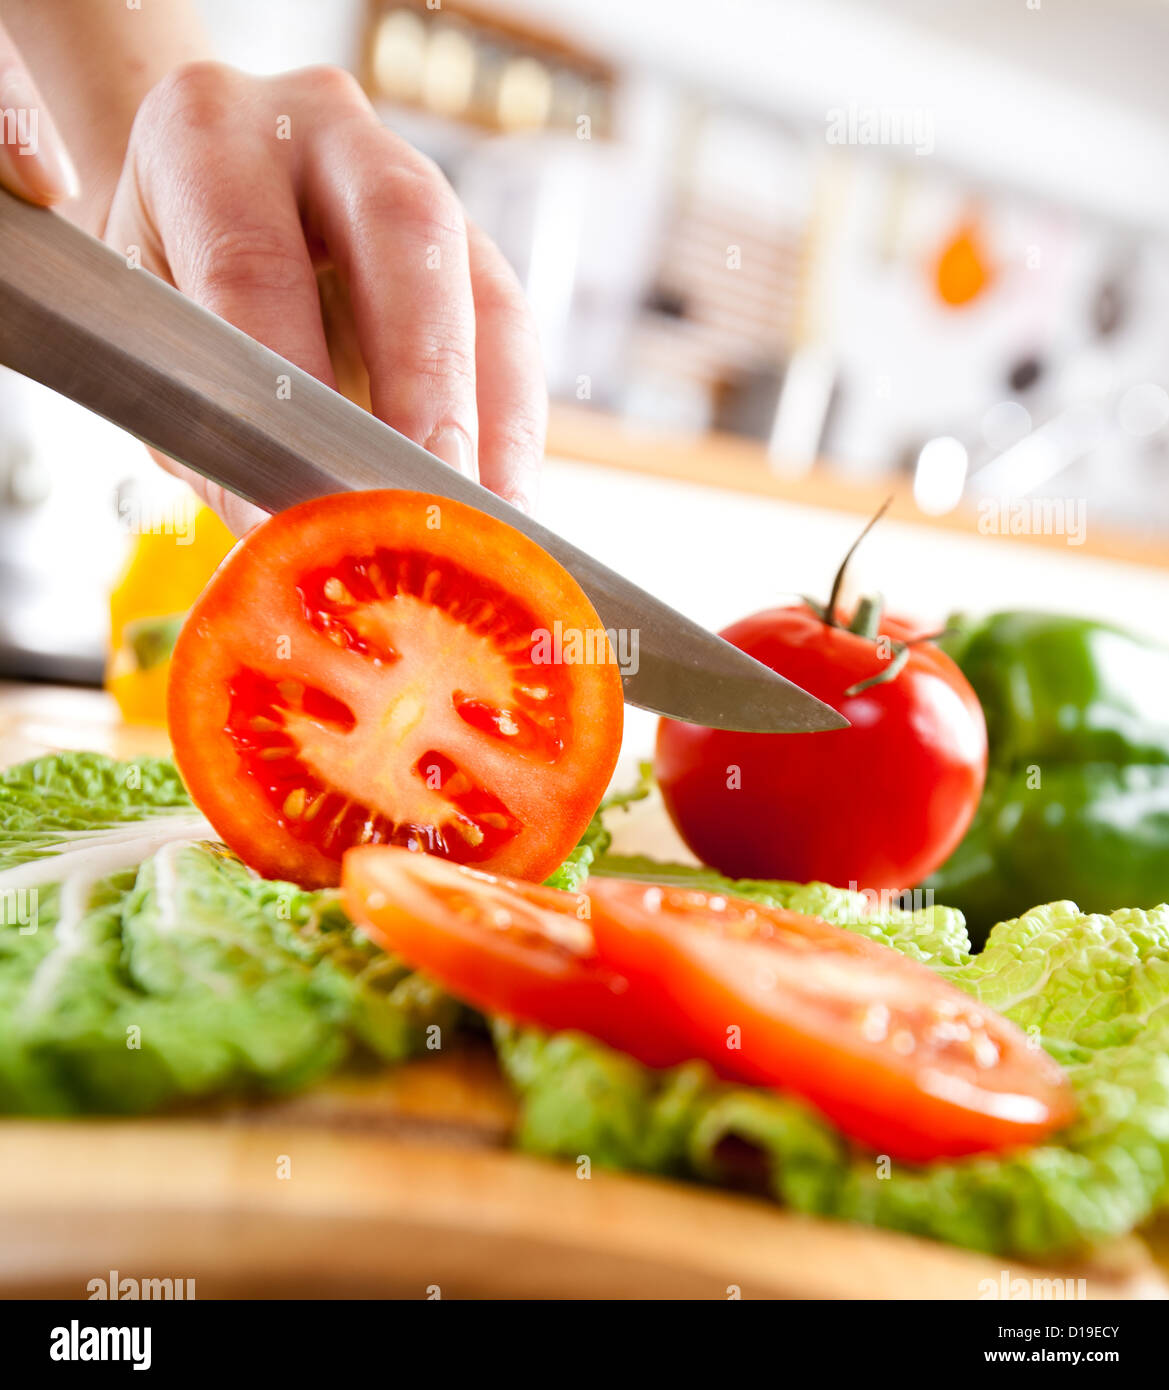 Woman's hands cutting tomato, behind fresh vegetables. Stock Photo